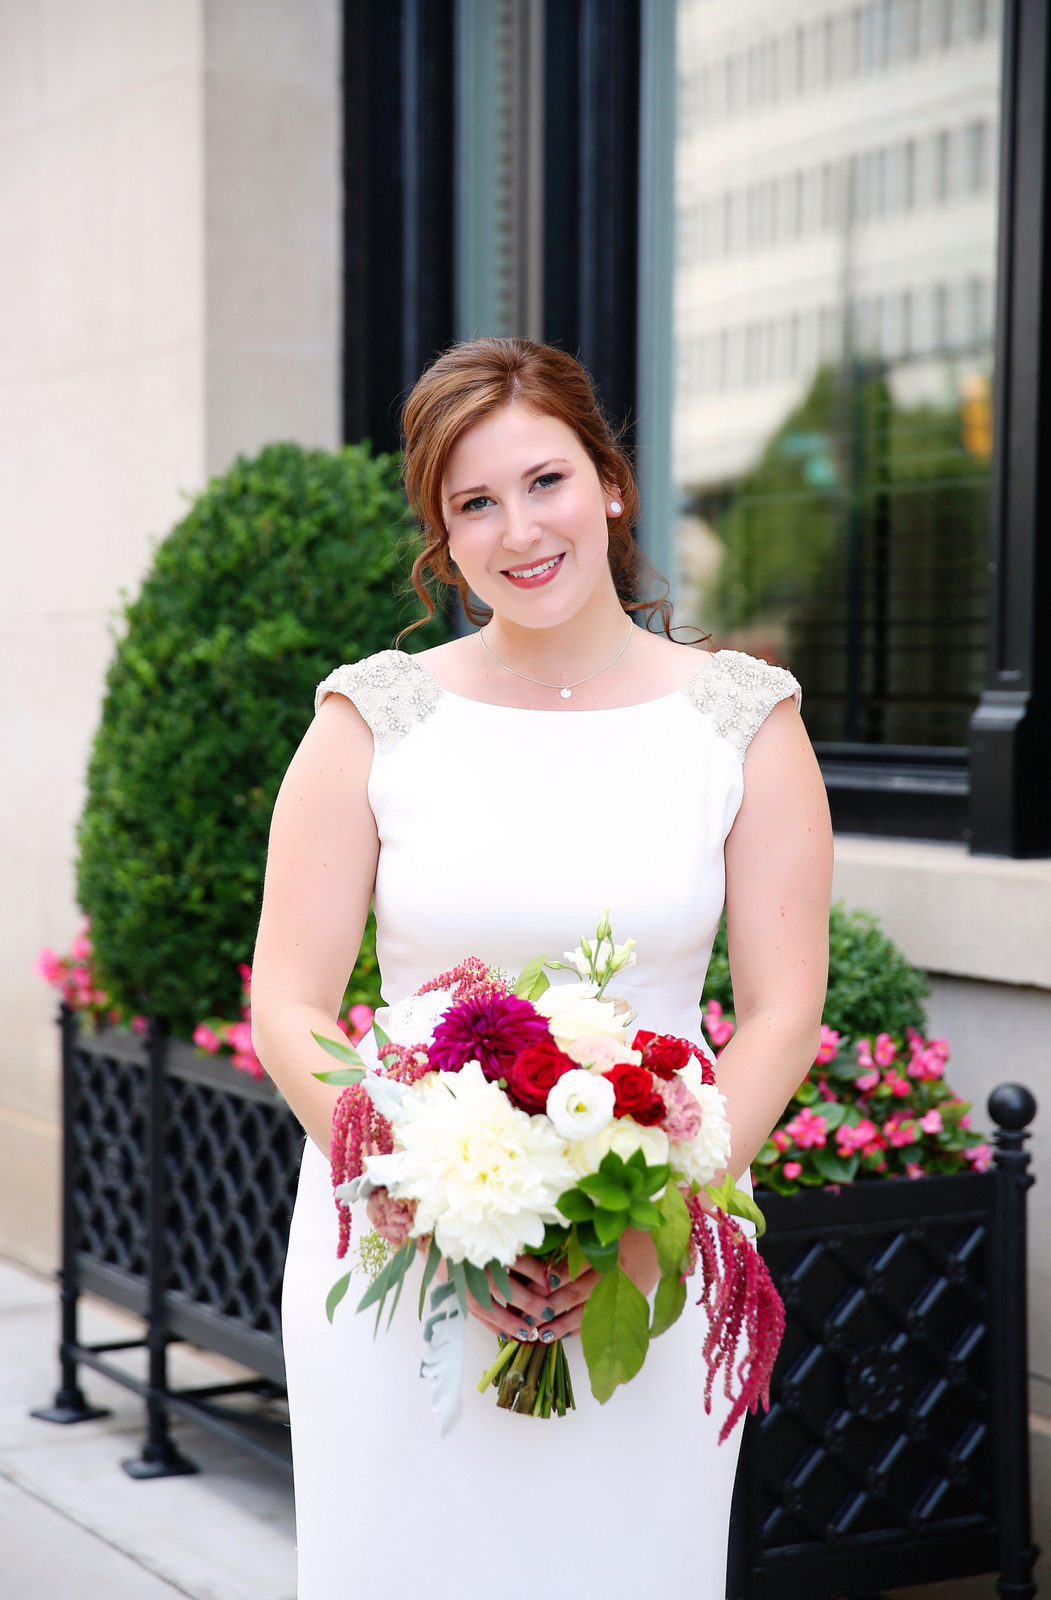 JS Weddings and Events, Grand Rapids Wedding planner and Floral Designer. An elegant and romantic summer wedding in Downtown Grand Rapids at the McKay Ballroom with Burgundy, Blush and Grey.